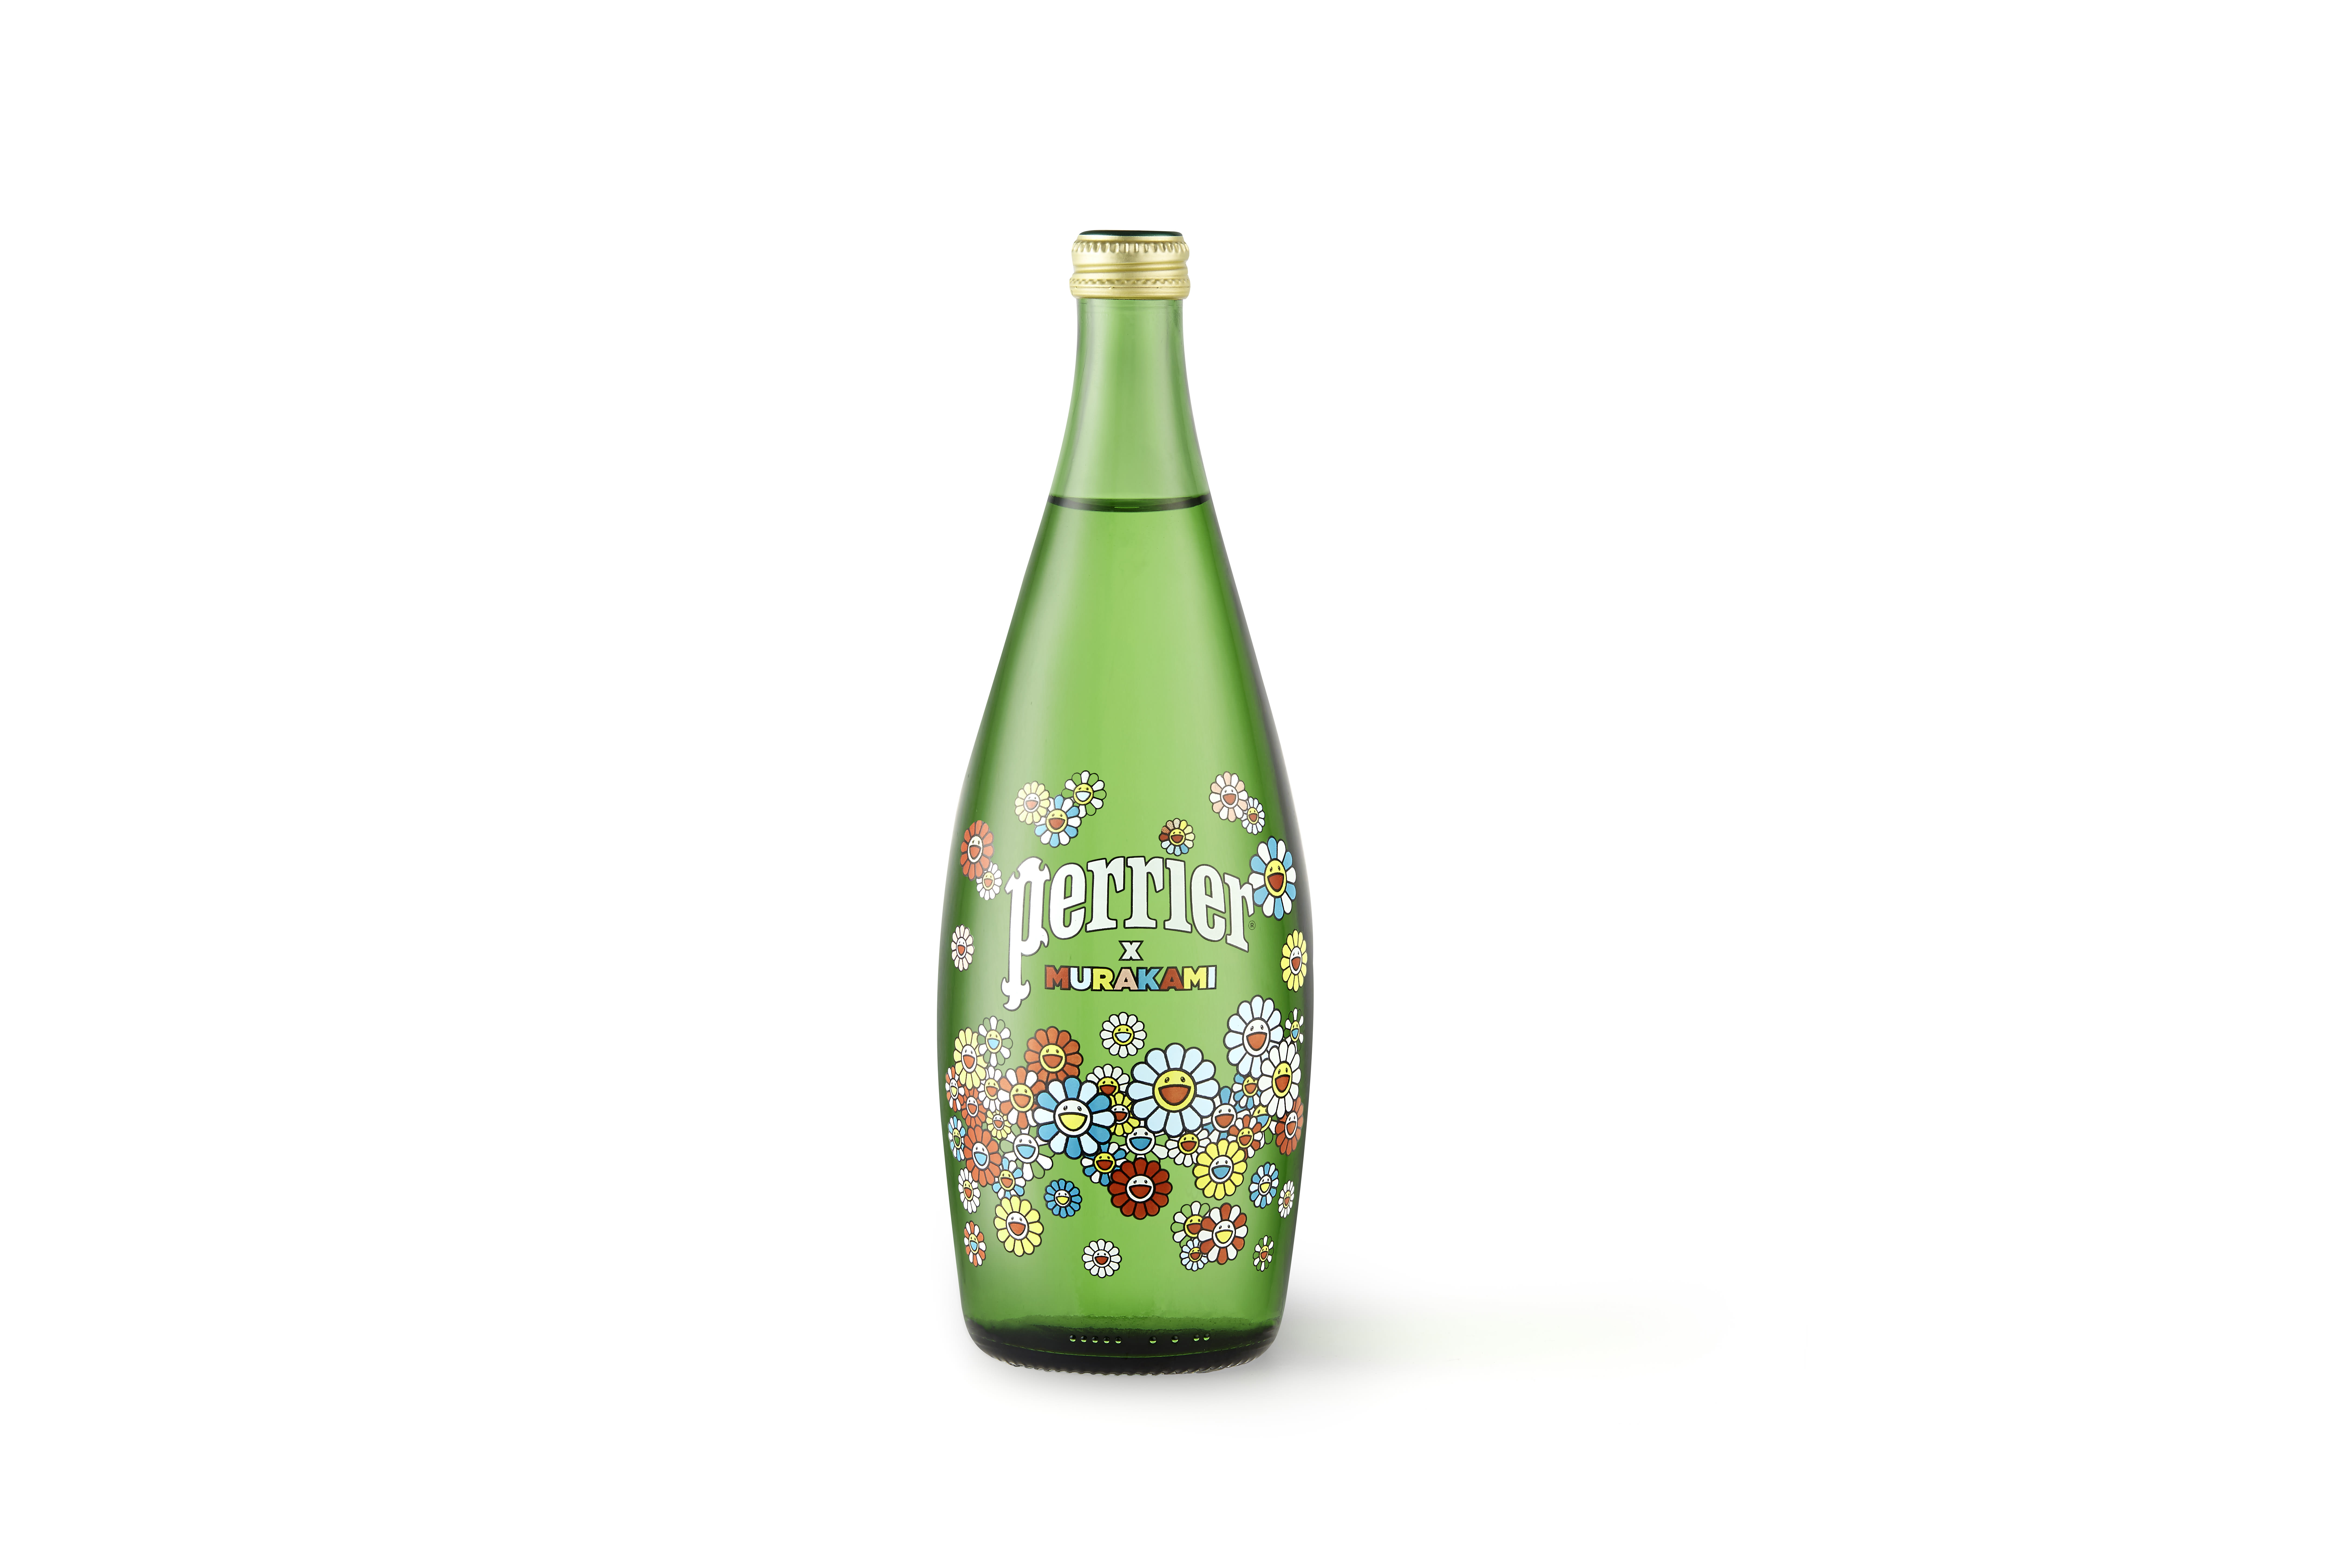 Perrier announces a new collaboration with renowned artist Takashi